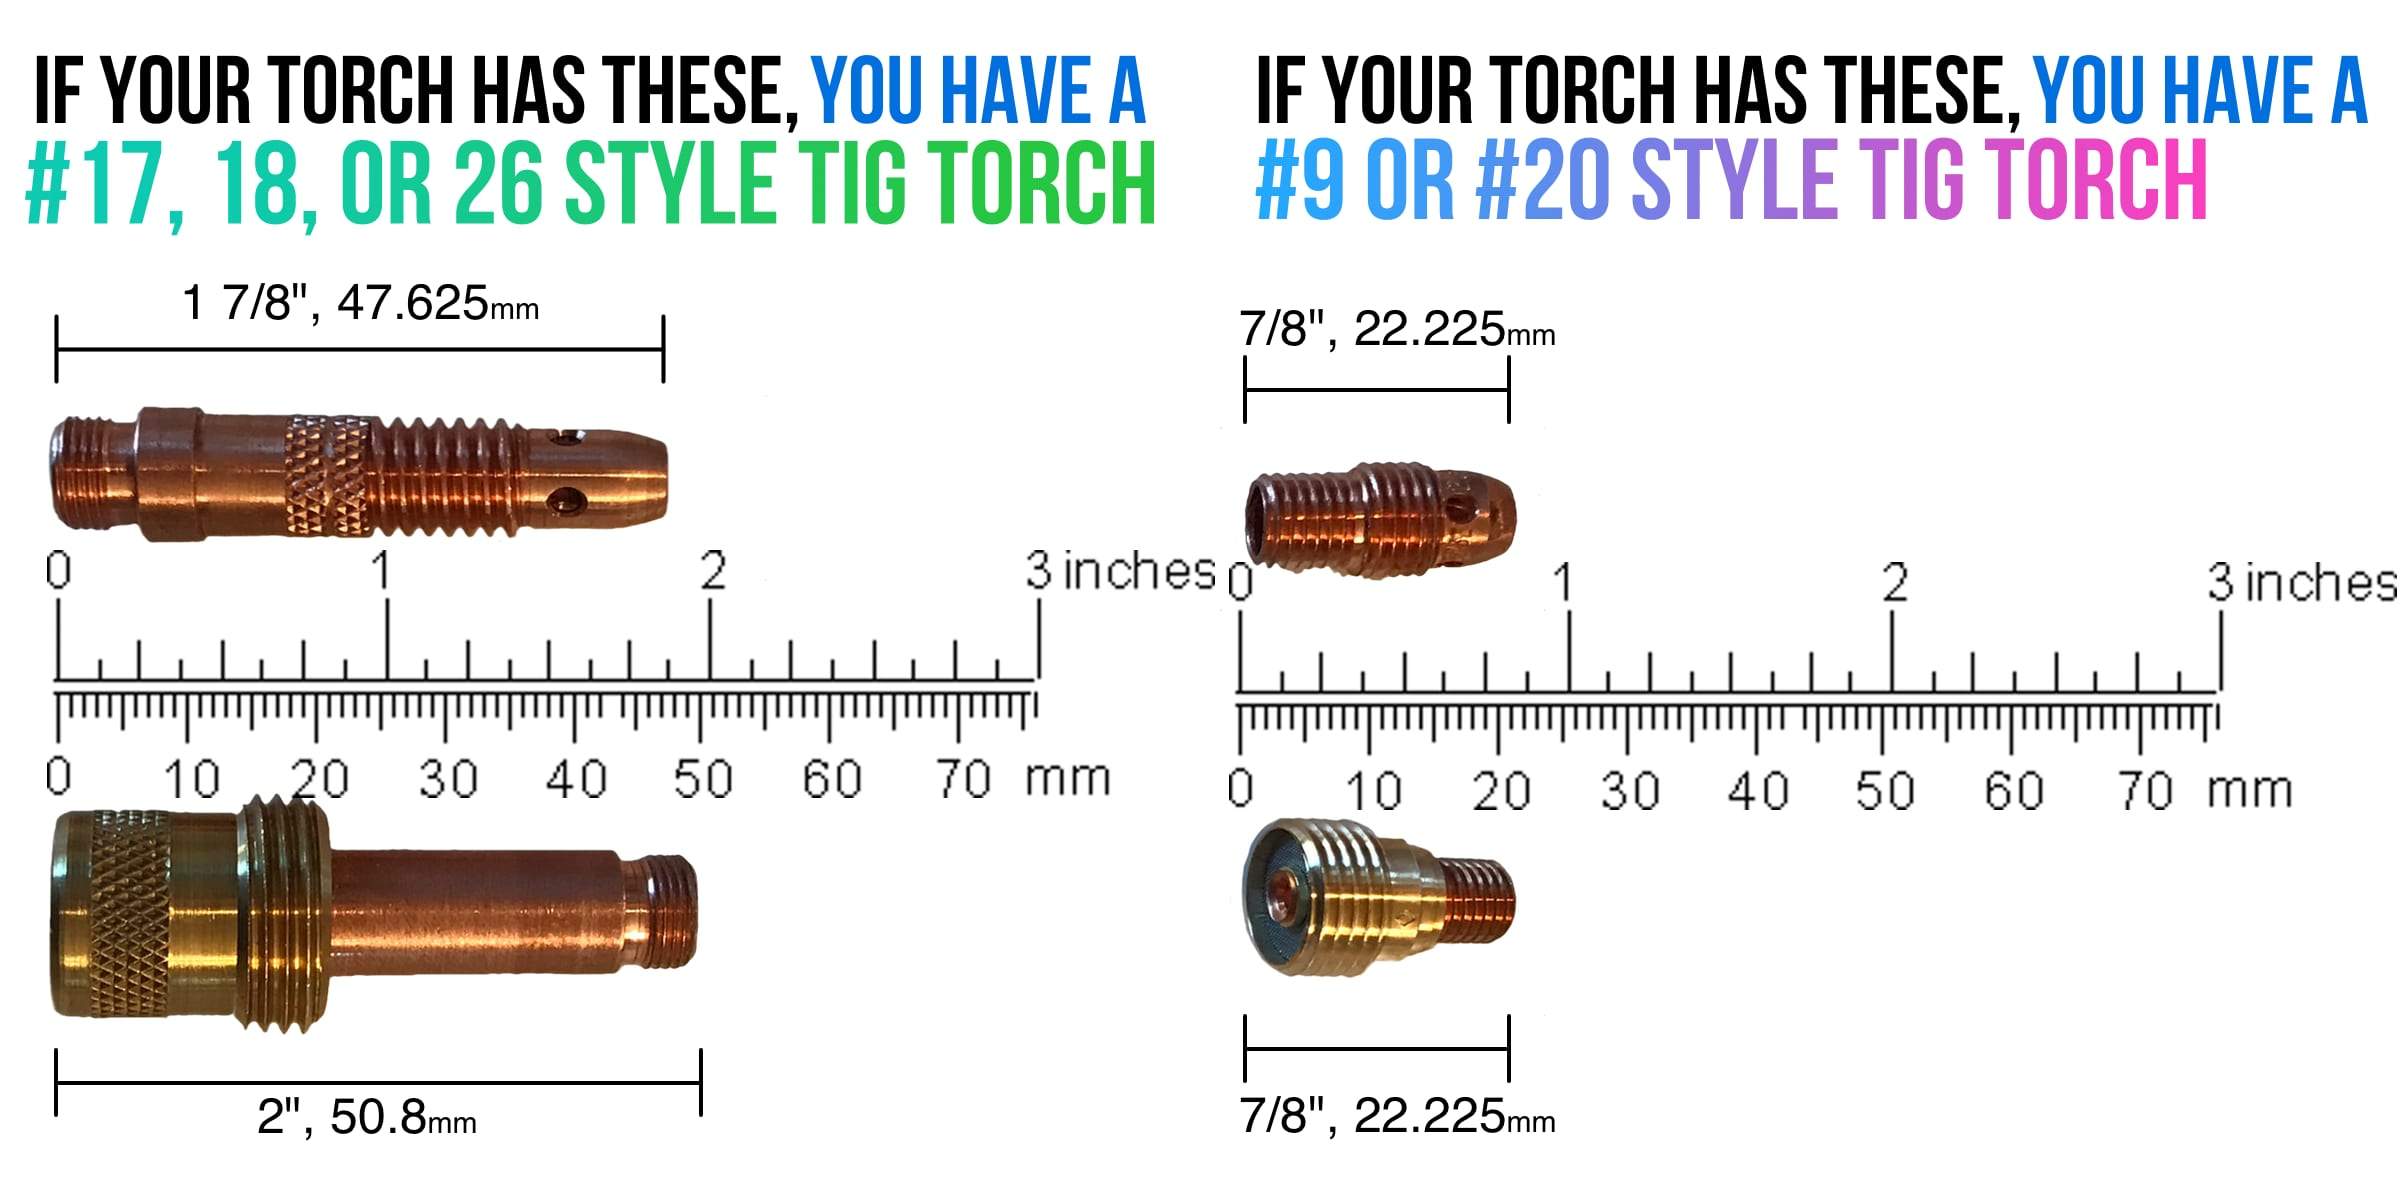 Furick Jazzy #10 Ceramic TIG Cup Kit (for #9/20 and #17/18/26 style torches) 2/PK